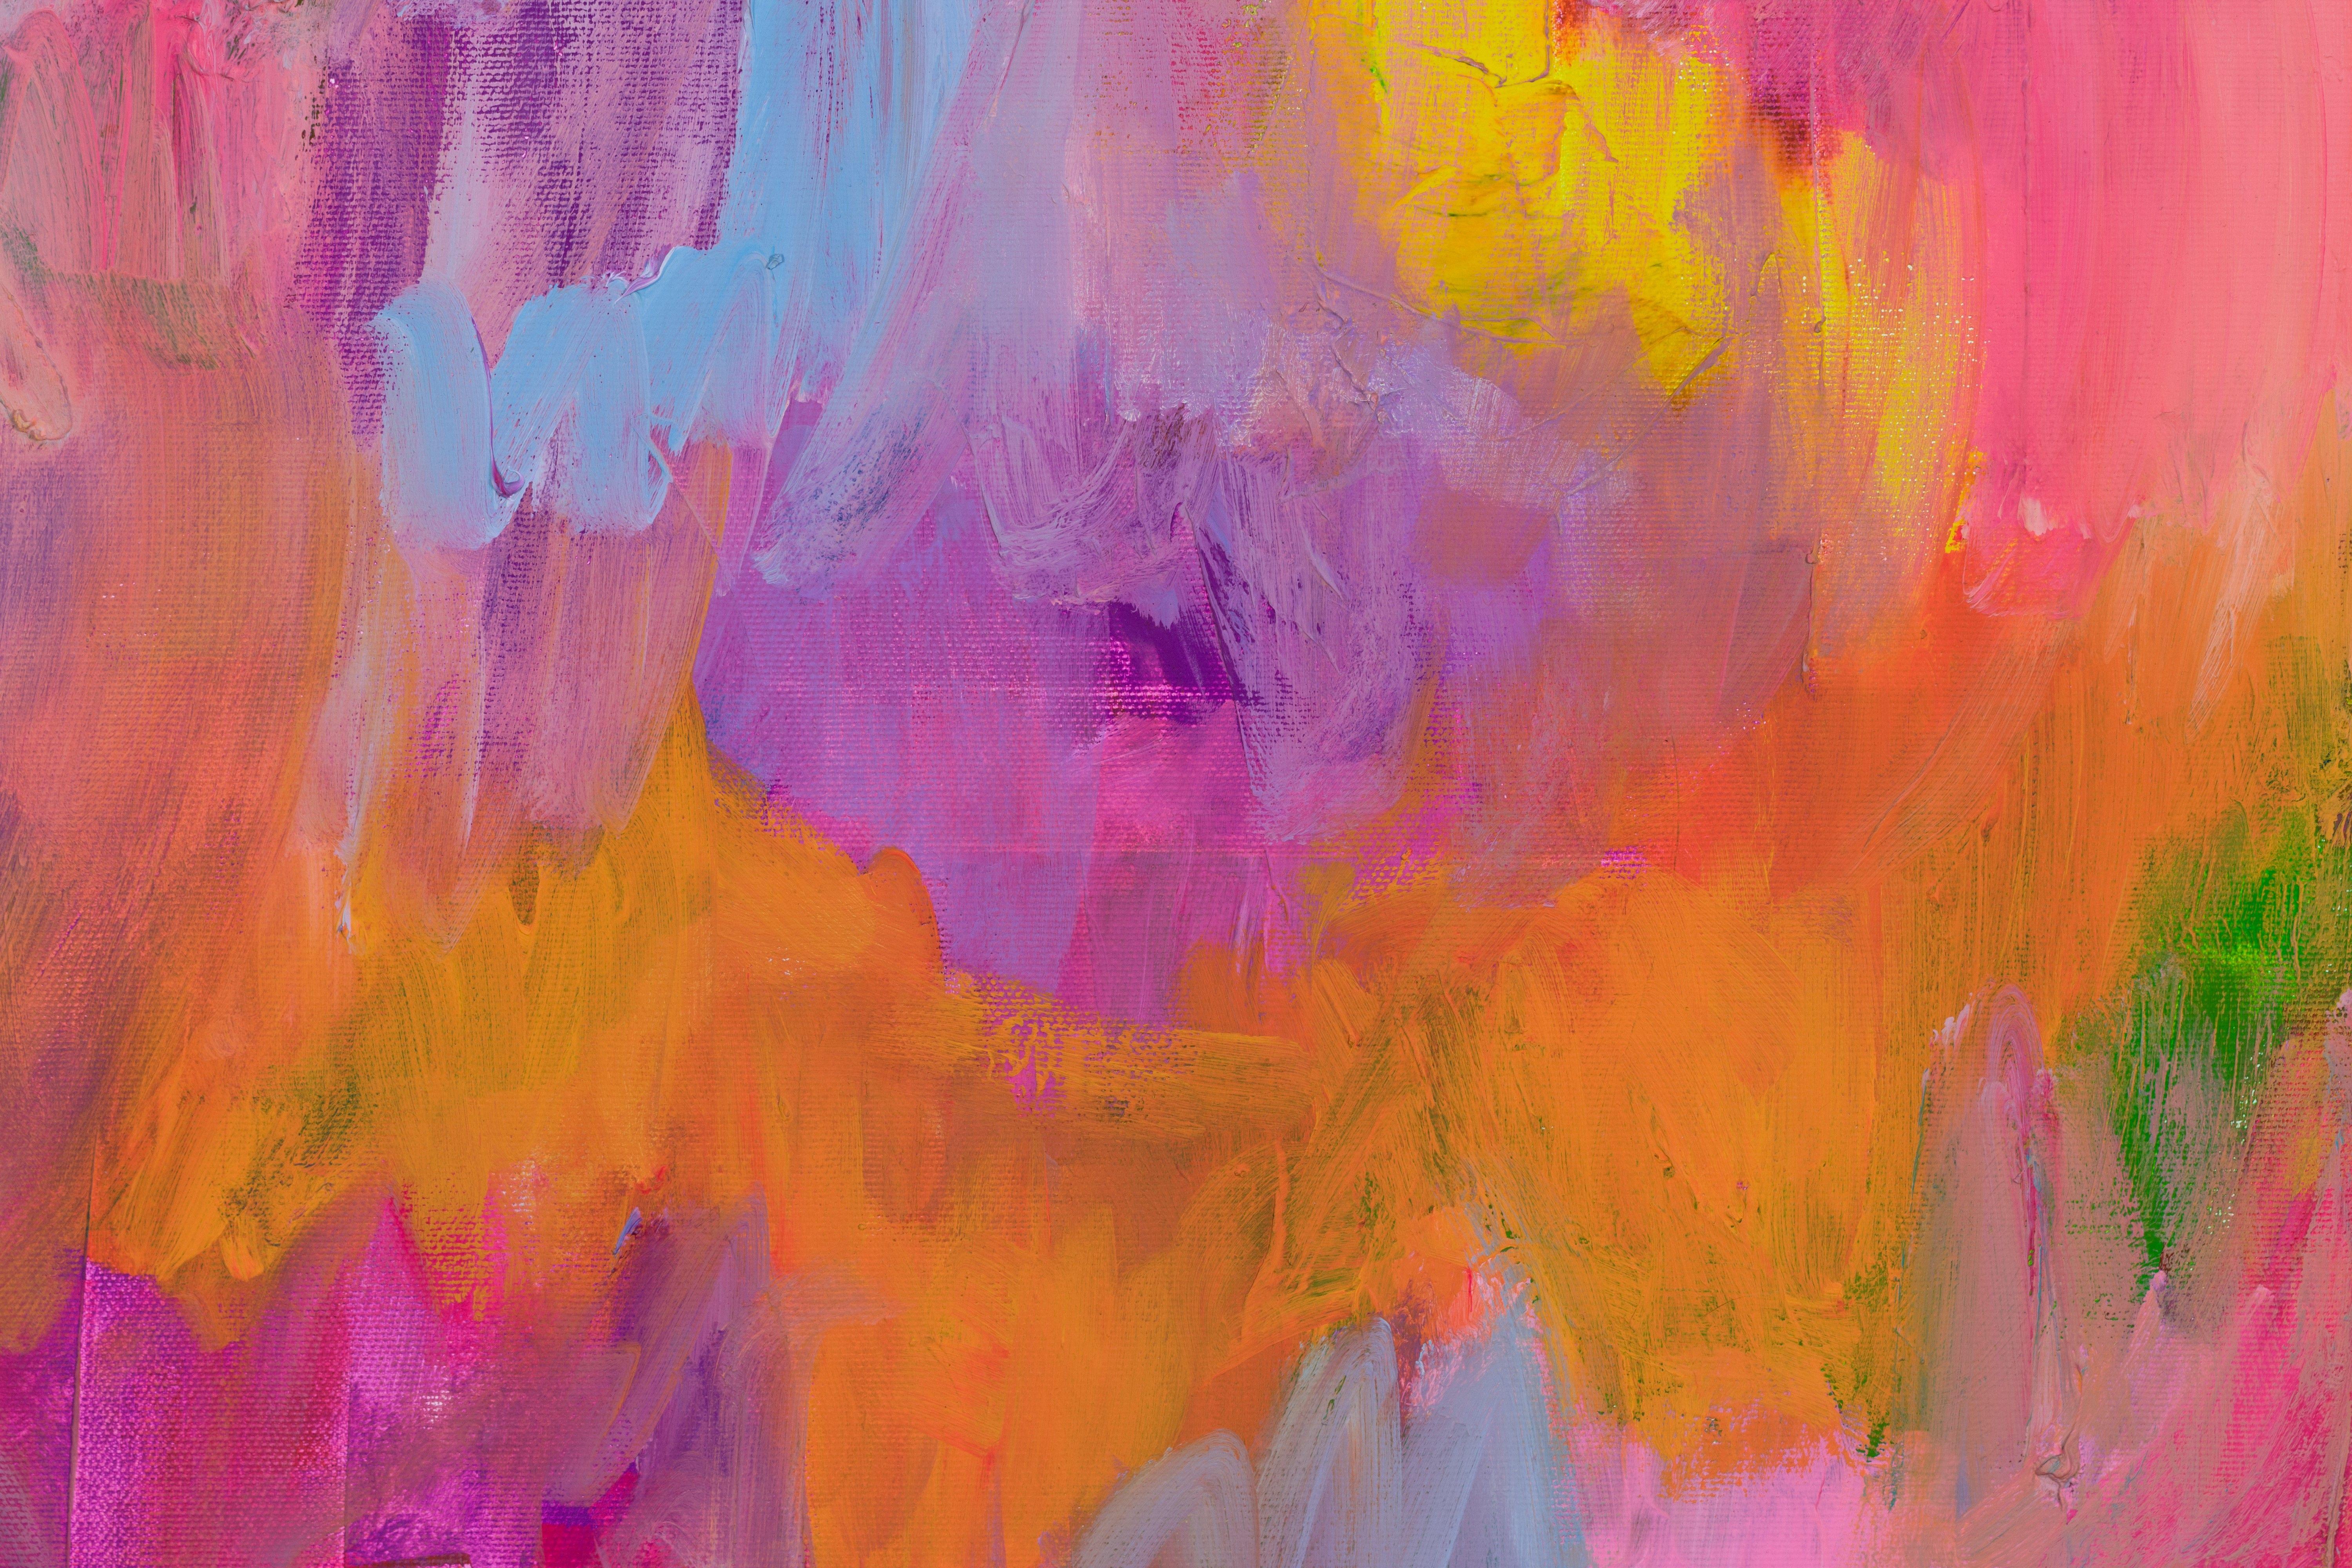 Liquid Dreams, Painting, Oil on Canvas - Pink Abstract Painting by Pamela Rys